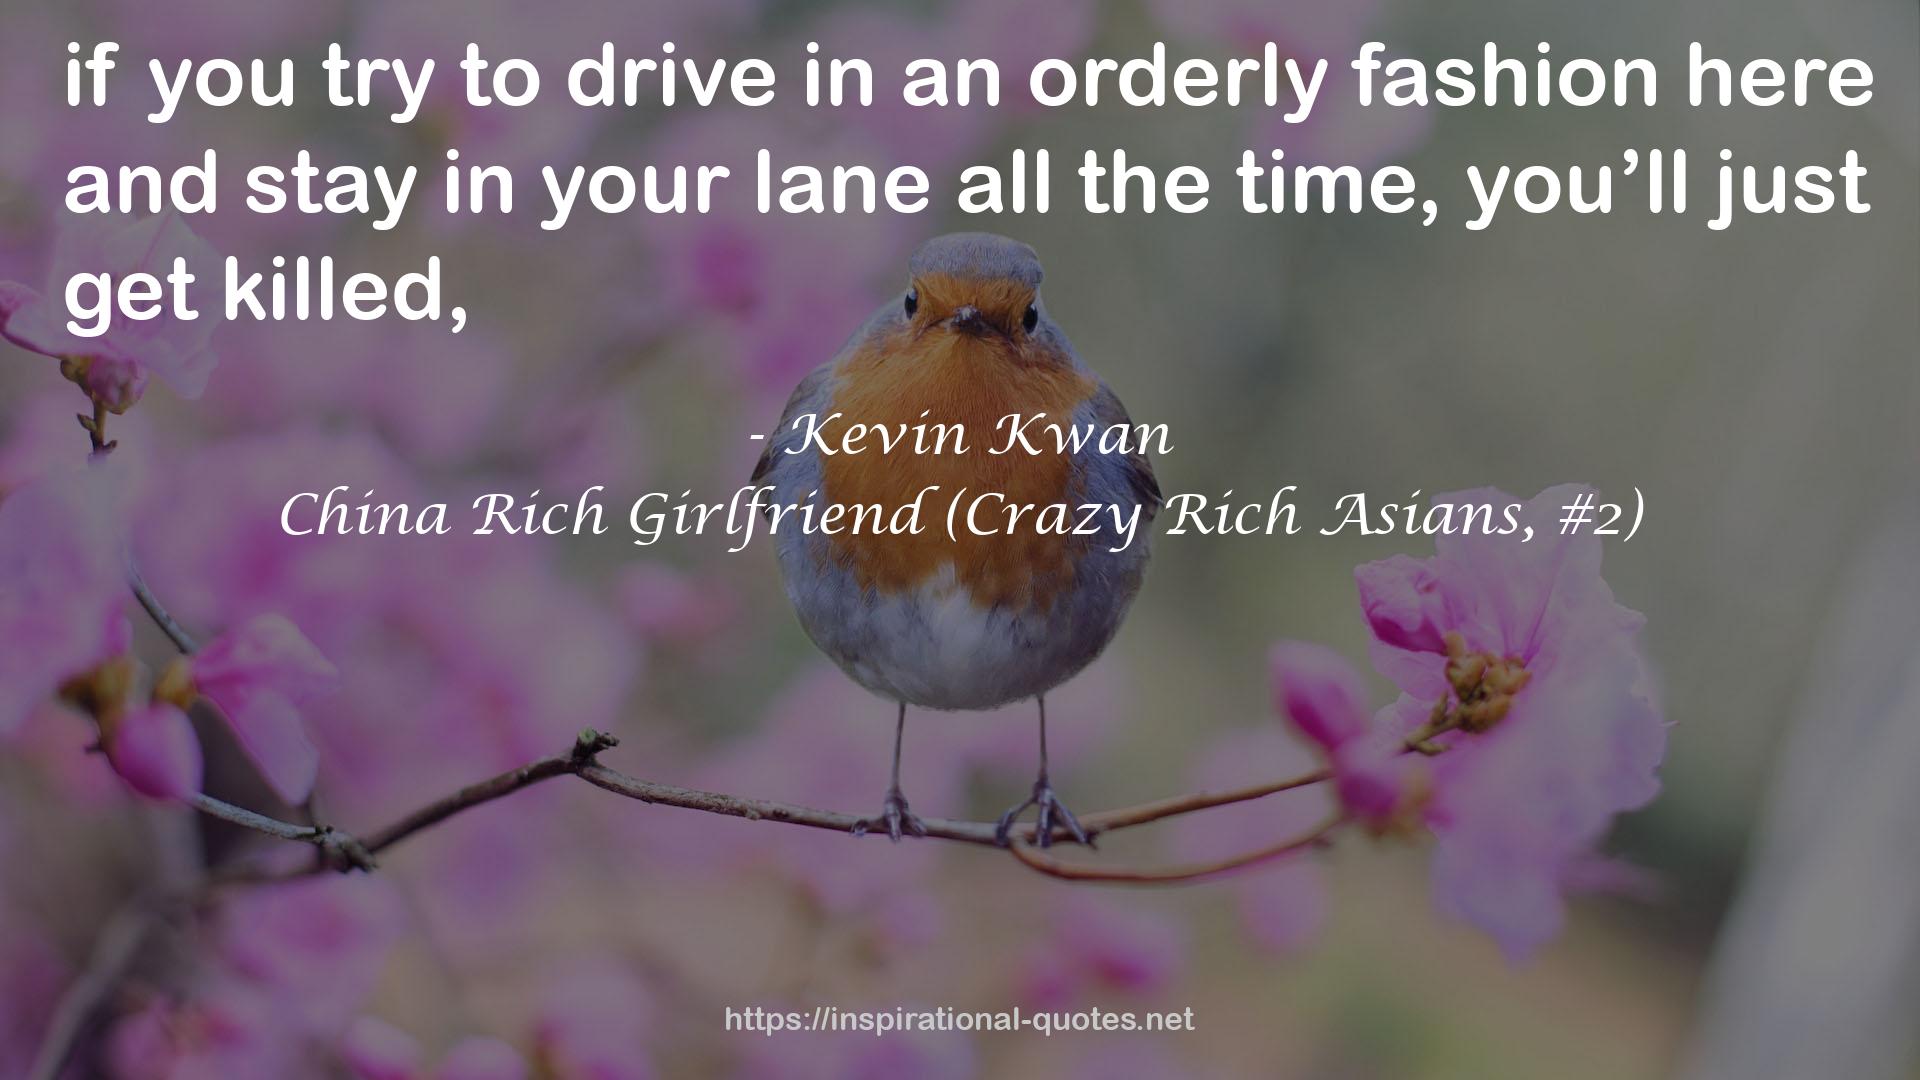 China Rich Girlfriend (Crazy Rich Asians, #2) QUOTES